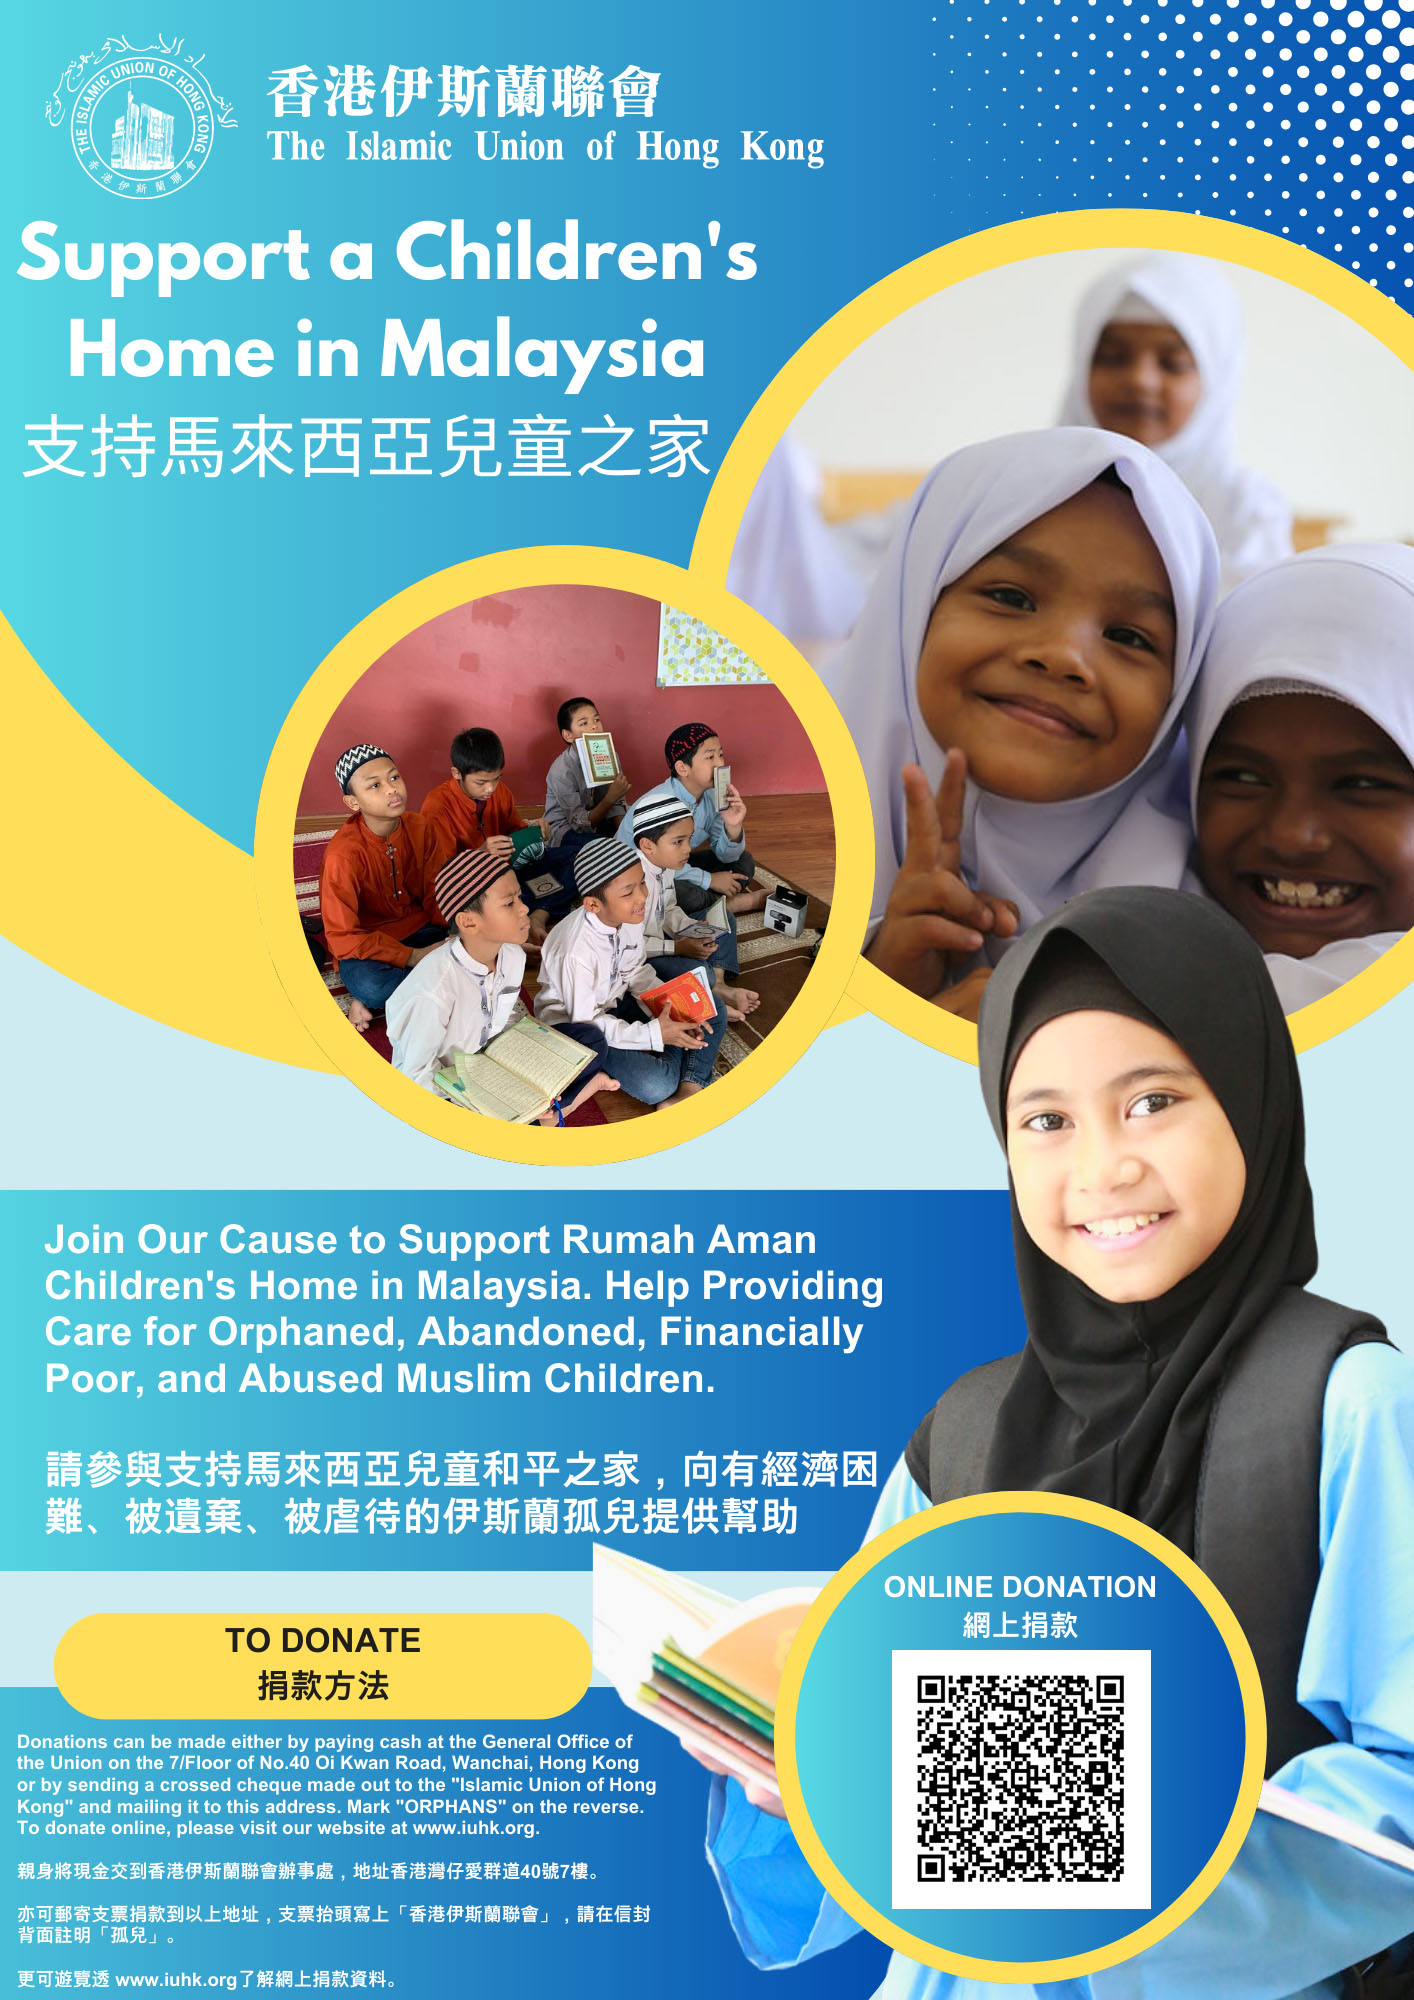 Support a Children's Home in Malaysia